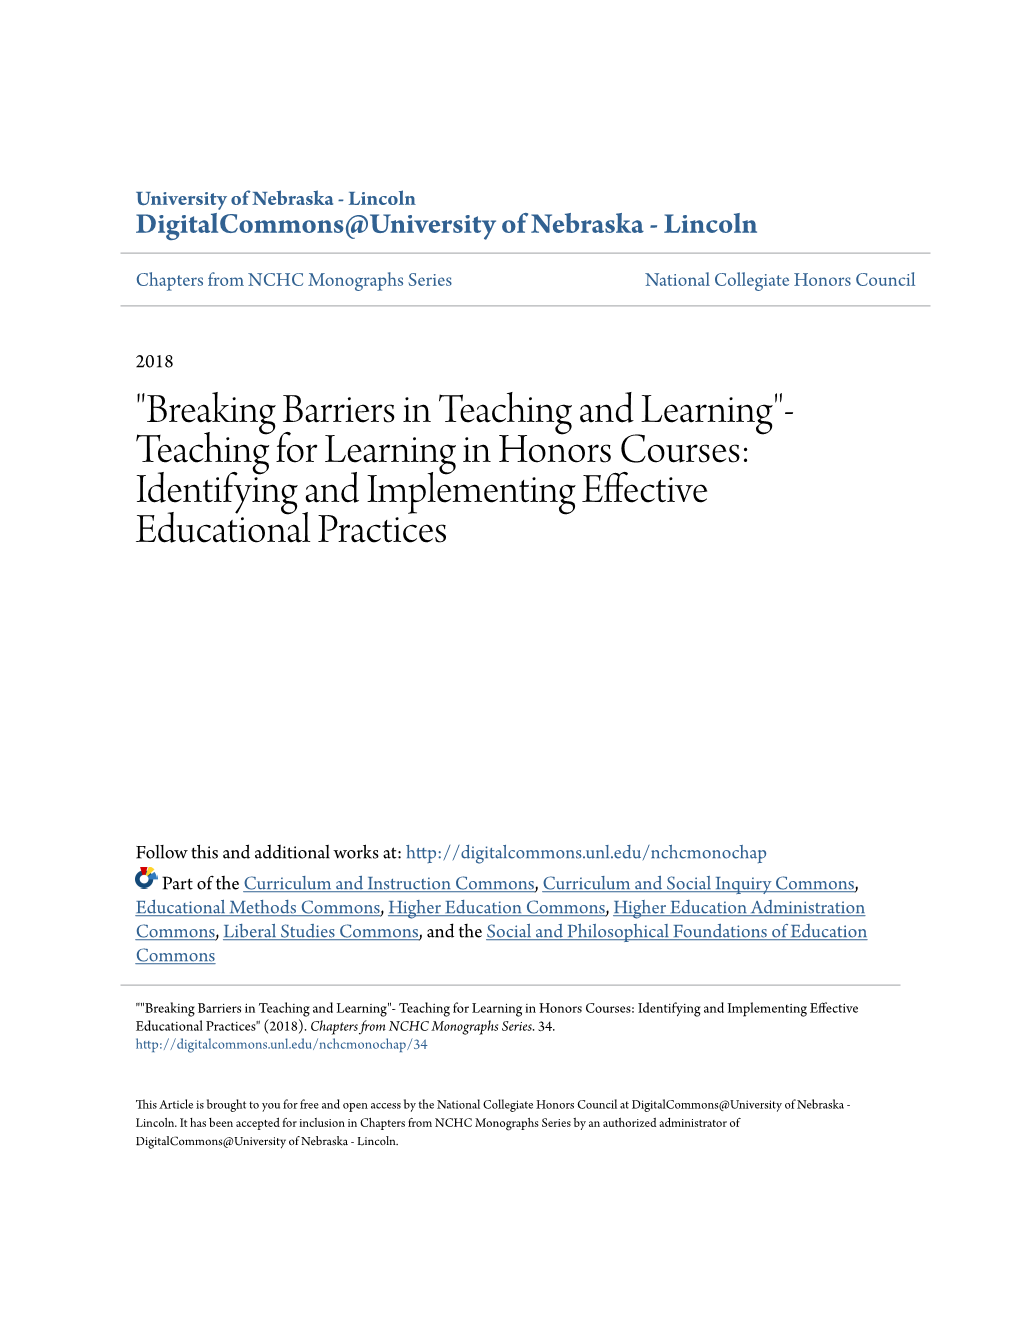 Teaching for Learning in Honors Courses: Identifying and Implementing Effective Educational Practices